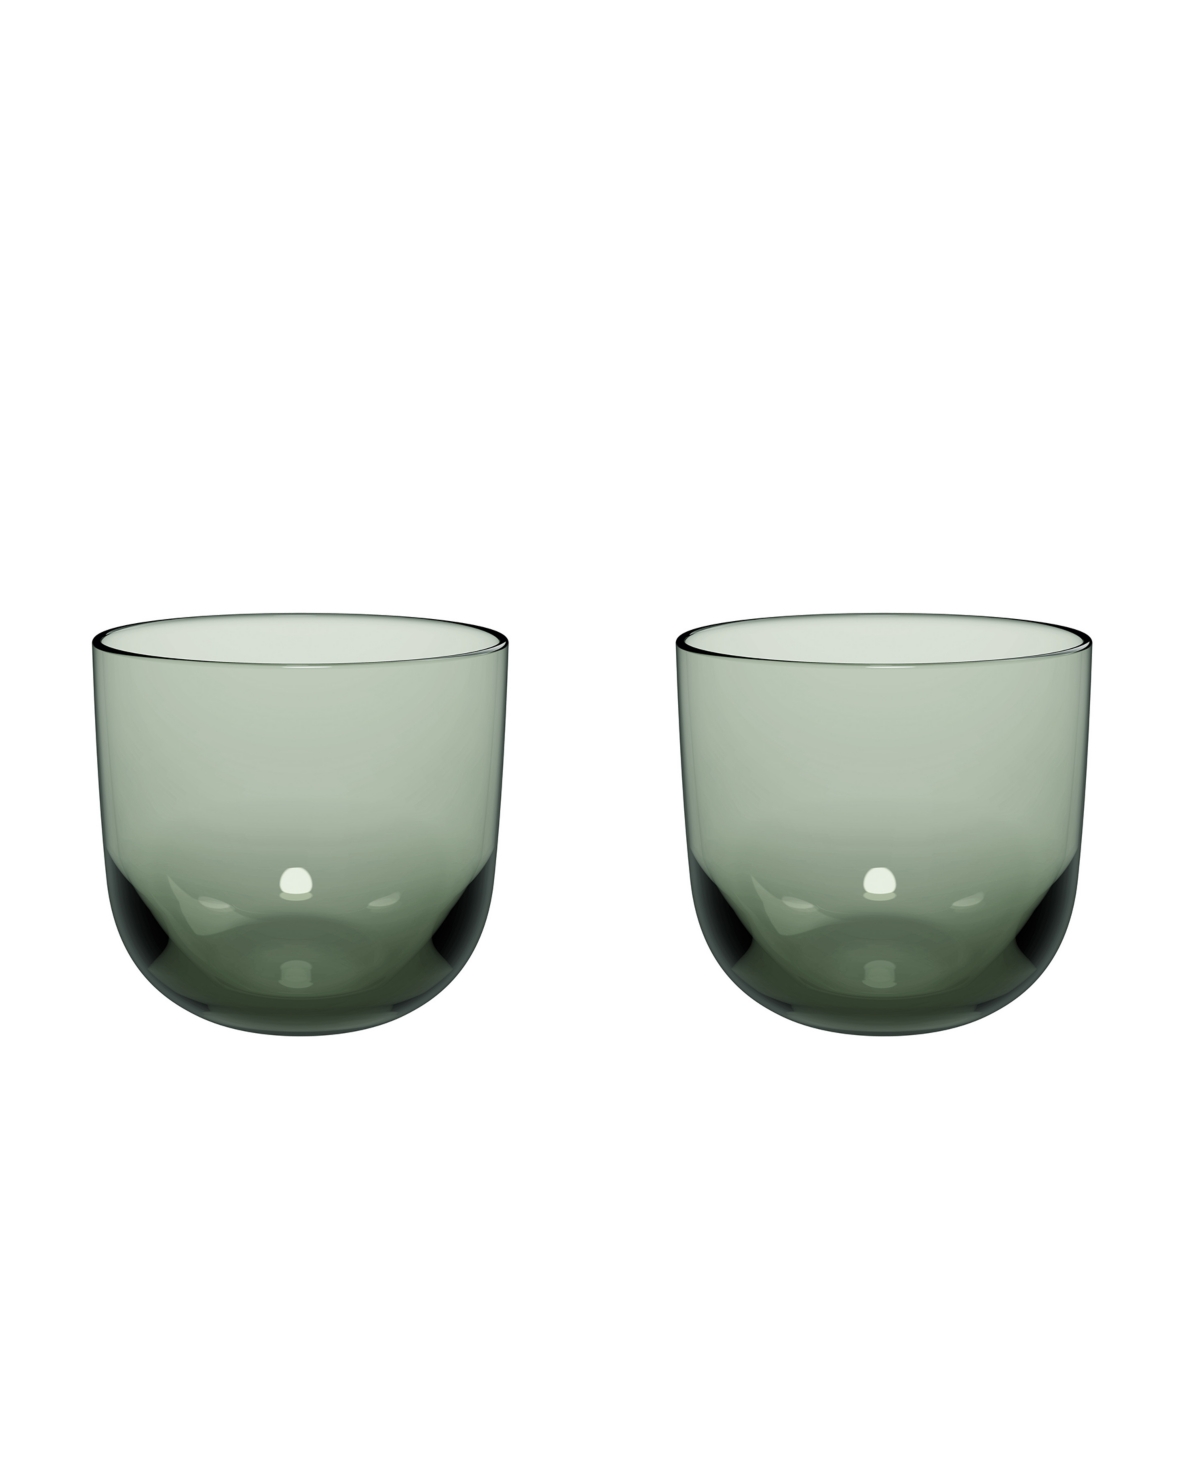 Villeroy & Boch Like Double Old Fashioned Tumbler Glasses, Set Of 2 In Sage Green